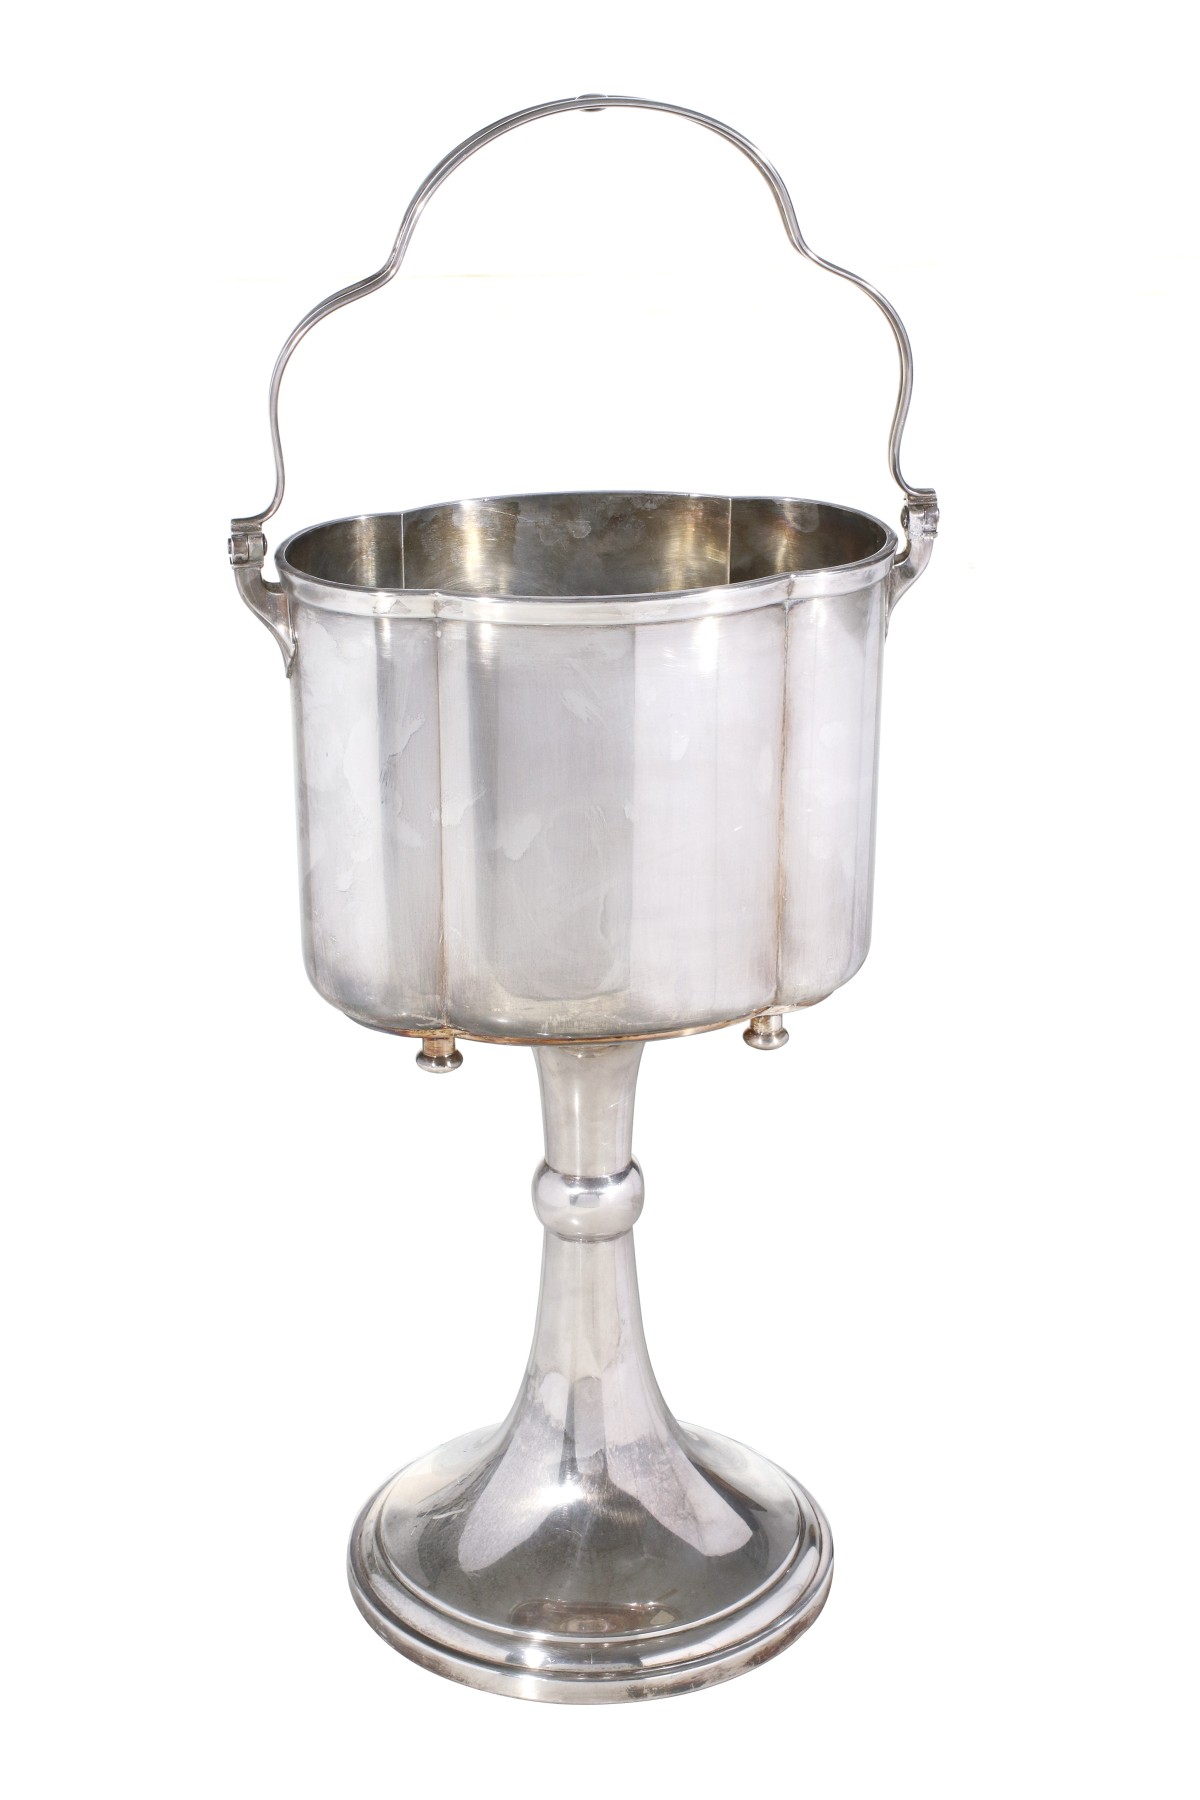 AN ART MODERNE SILVER PLATED WINE OR CHAMPAGNE COOLER